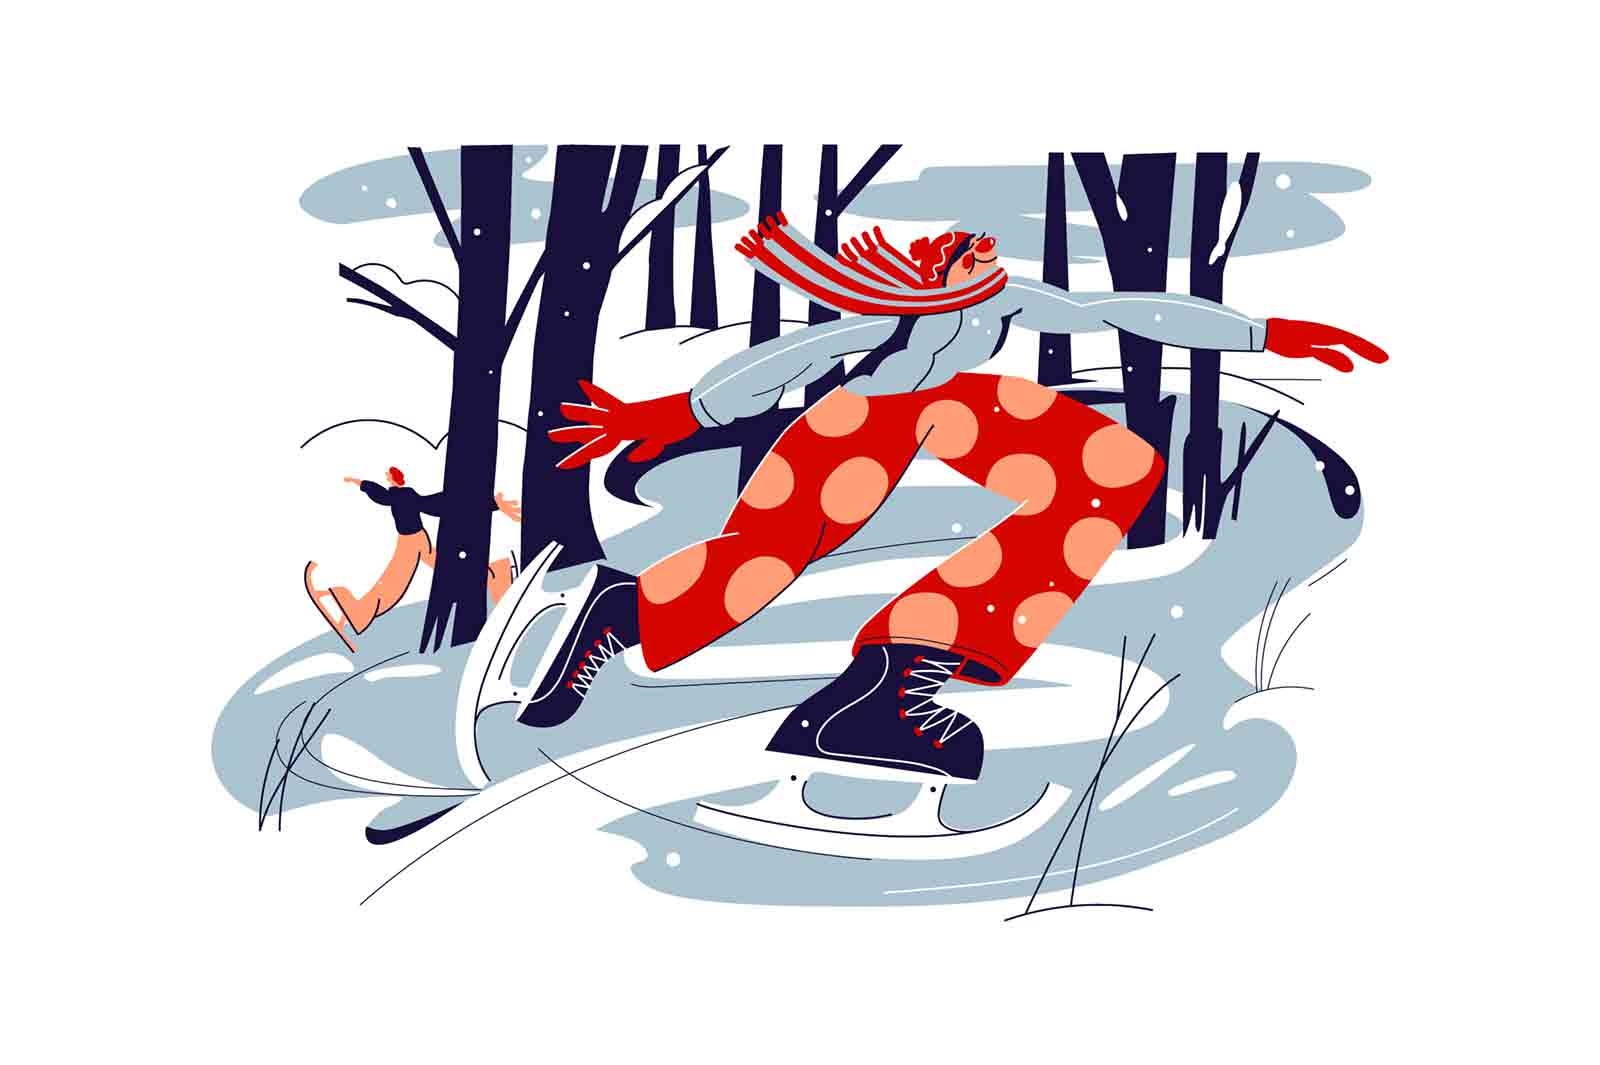 Ice skating on rink, winter outdoors activity vector illustration. Winter sports flat style concept. Figure skater idea